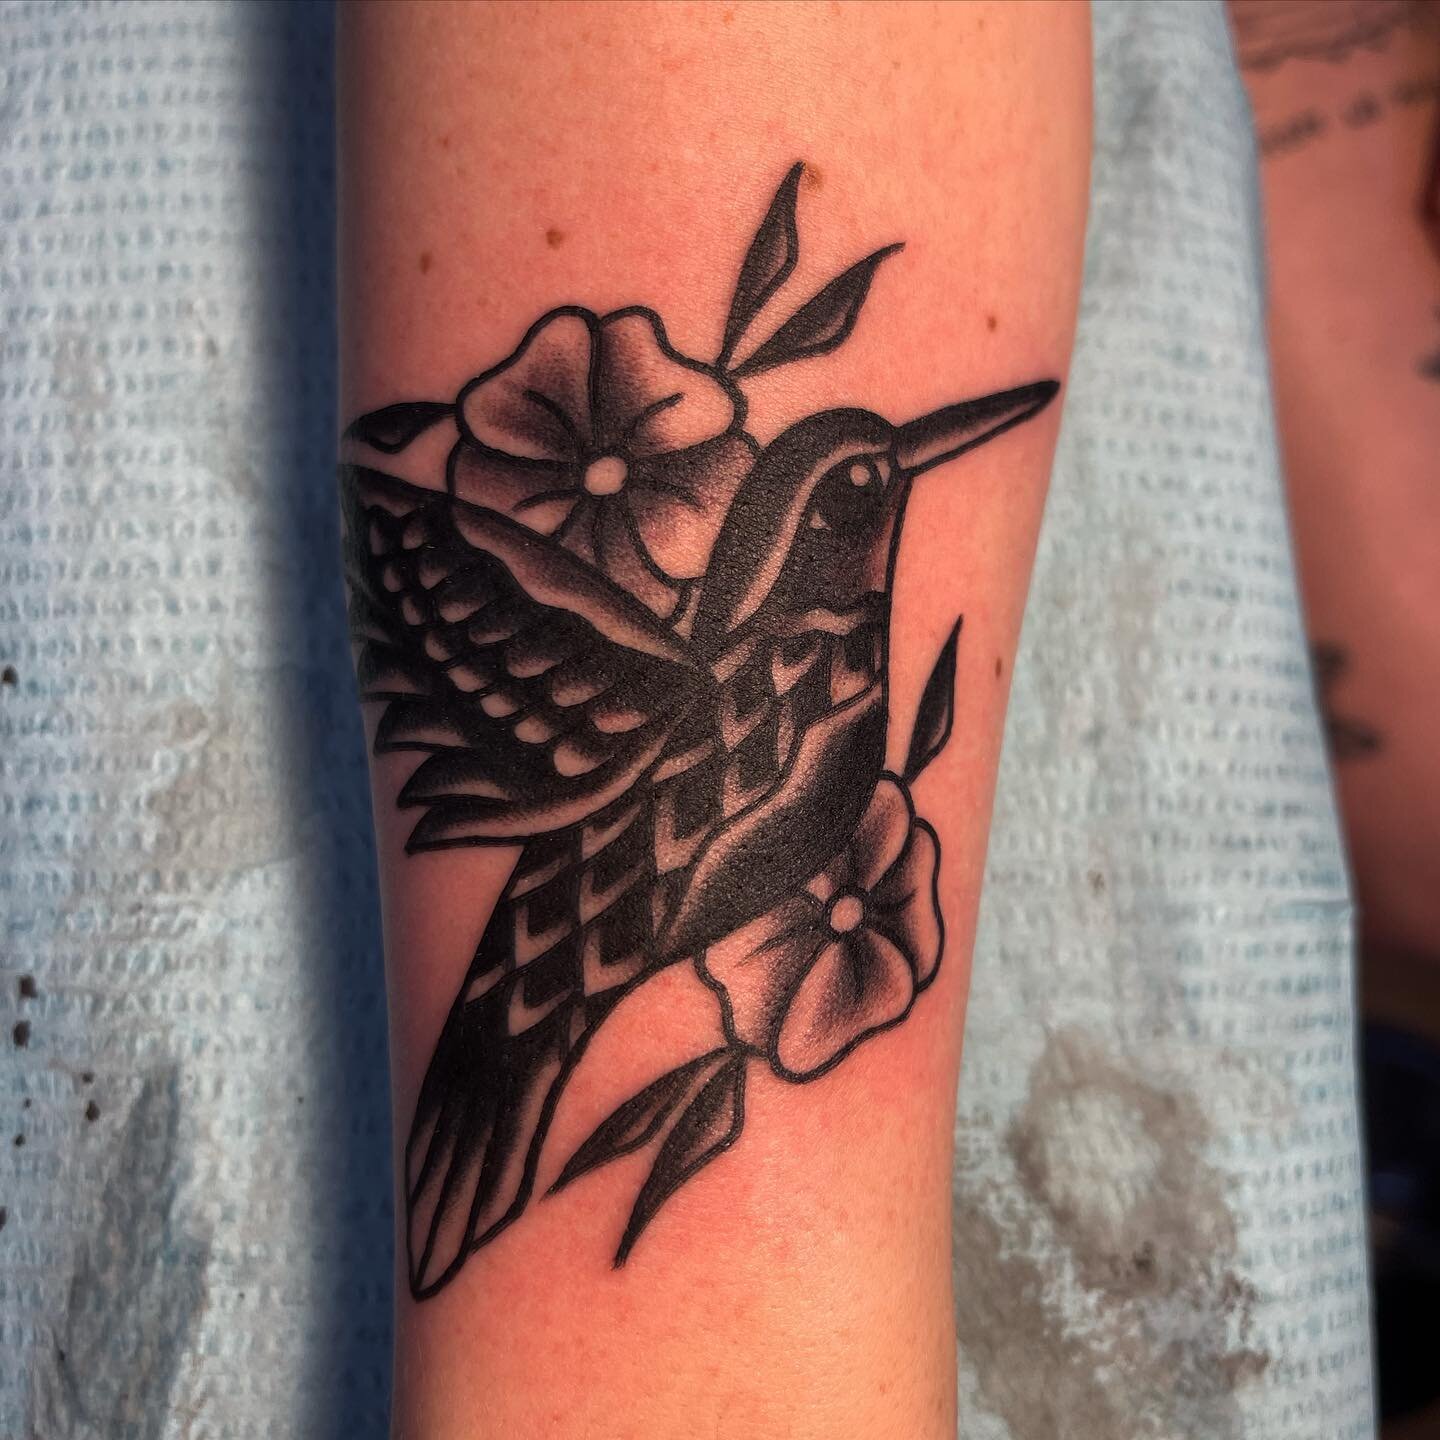 Black and grey version from my flash, thanks !
#traditionaltattoo #tradworkers #americantraditional #blackandgreytattoo #blackworkers #blackworktattoo #blackworktattoos #onlyblacktattoos #usatraditional #topclasstraditional #birdtattoo #birdtattoos #